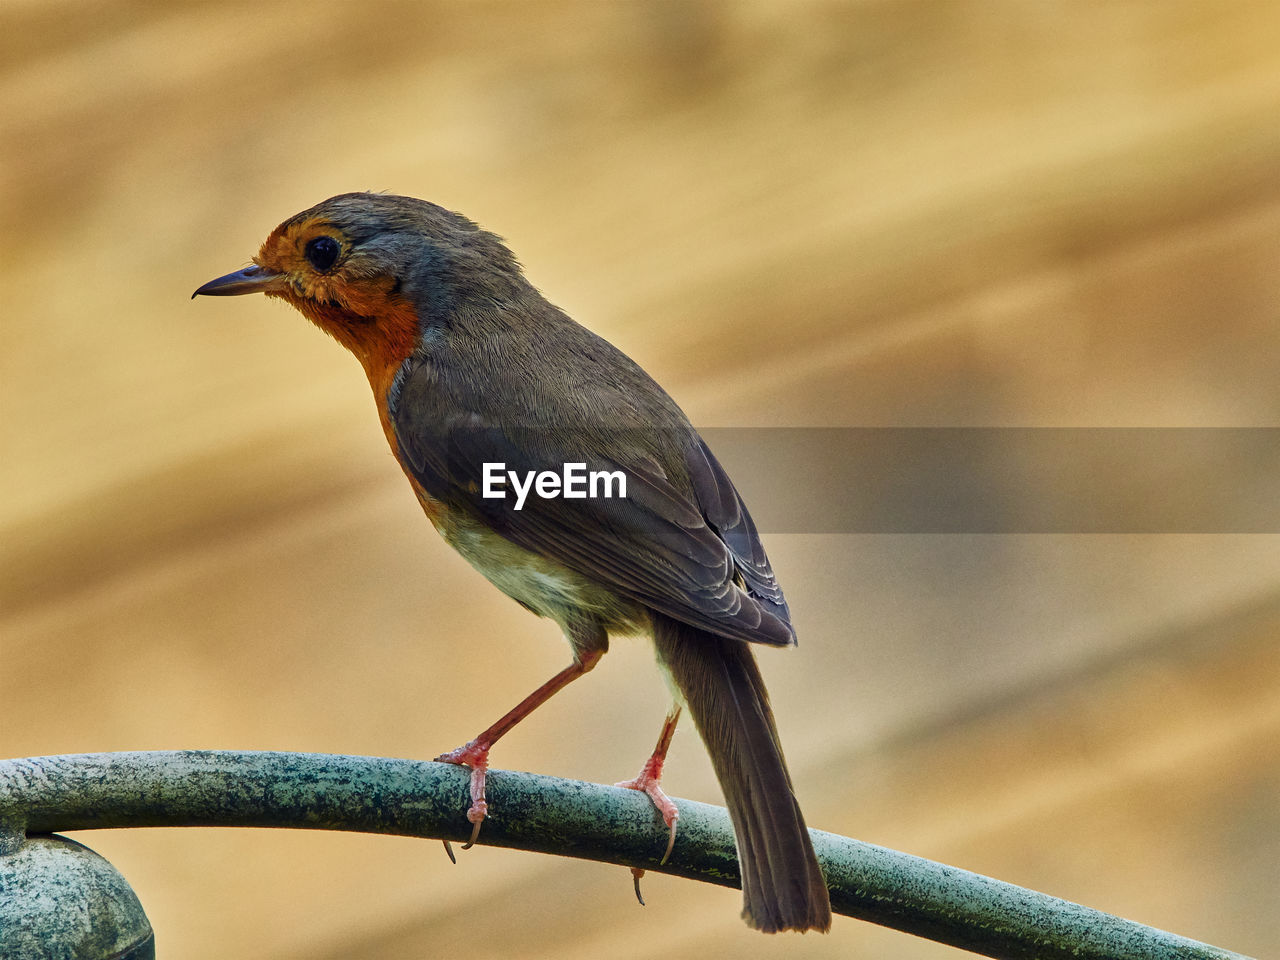 bird, animal themes, animal, animal wildlife, one animal, wildlife, beak, perching, focus on foreground, close-up, full length, no people, songbird, branch, nature, robin, day, outdoors, beauty in nature, side view